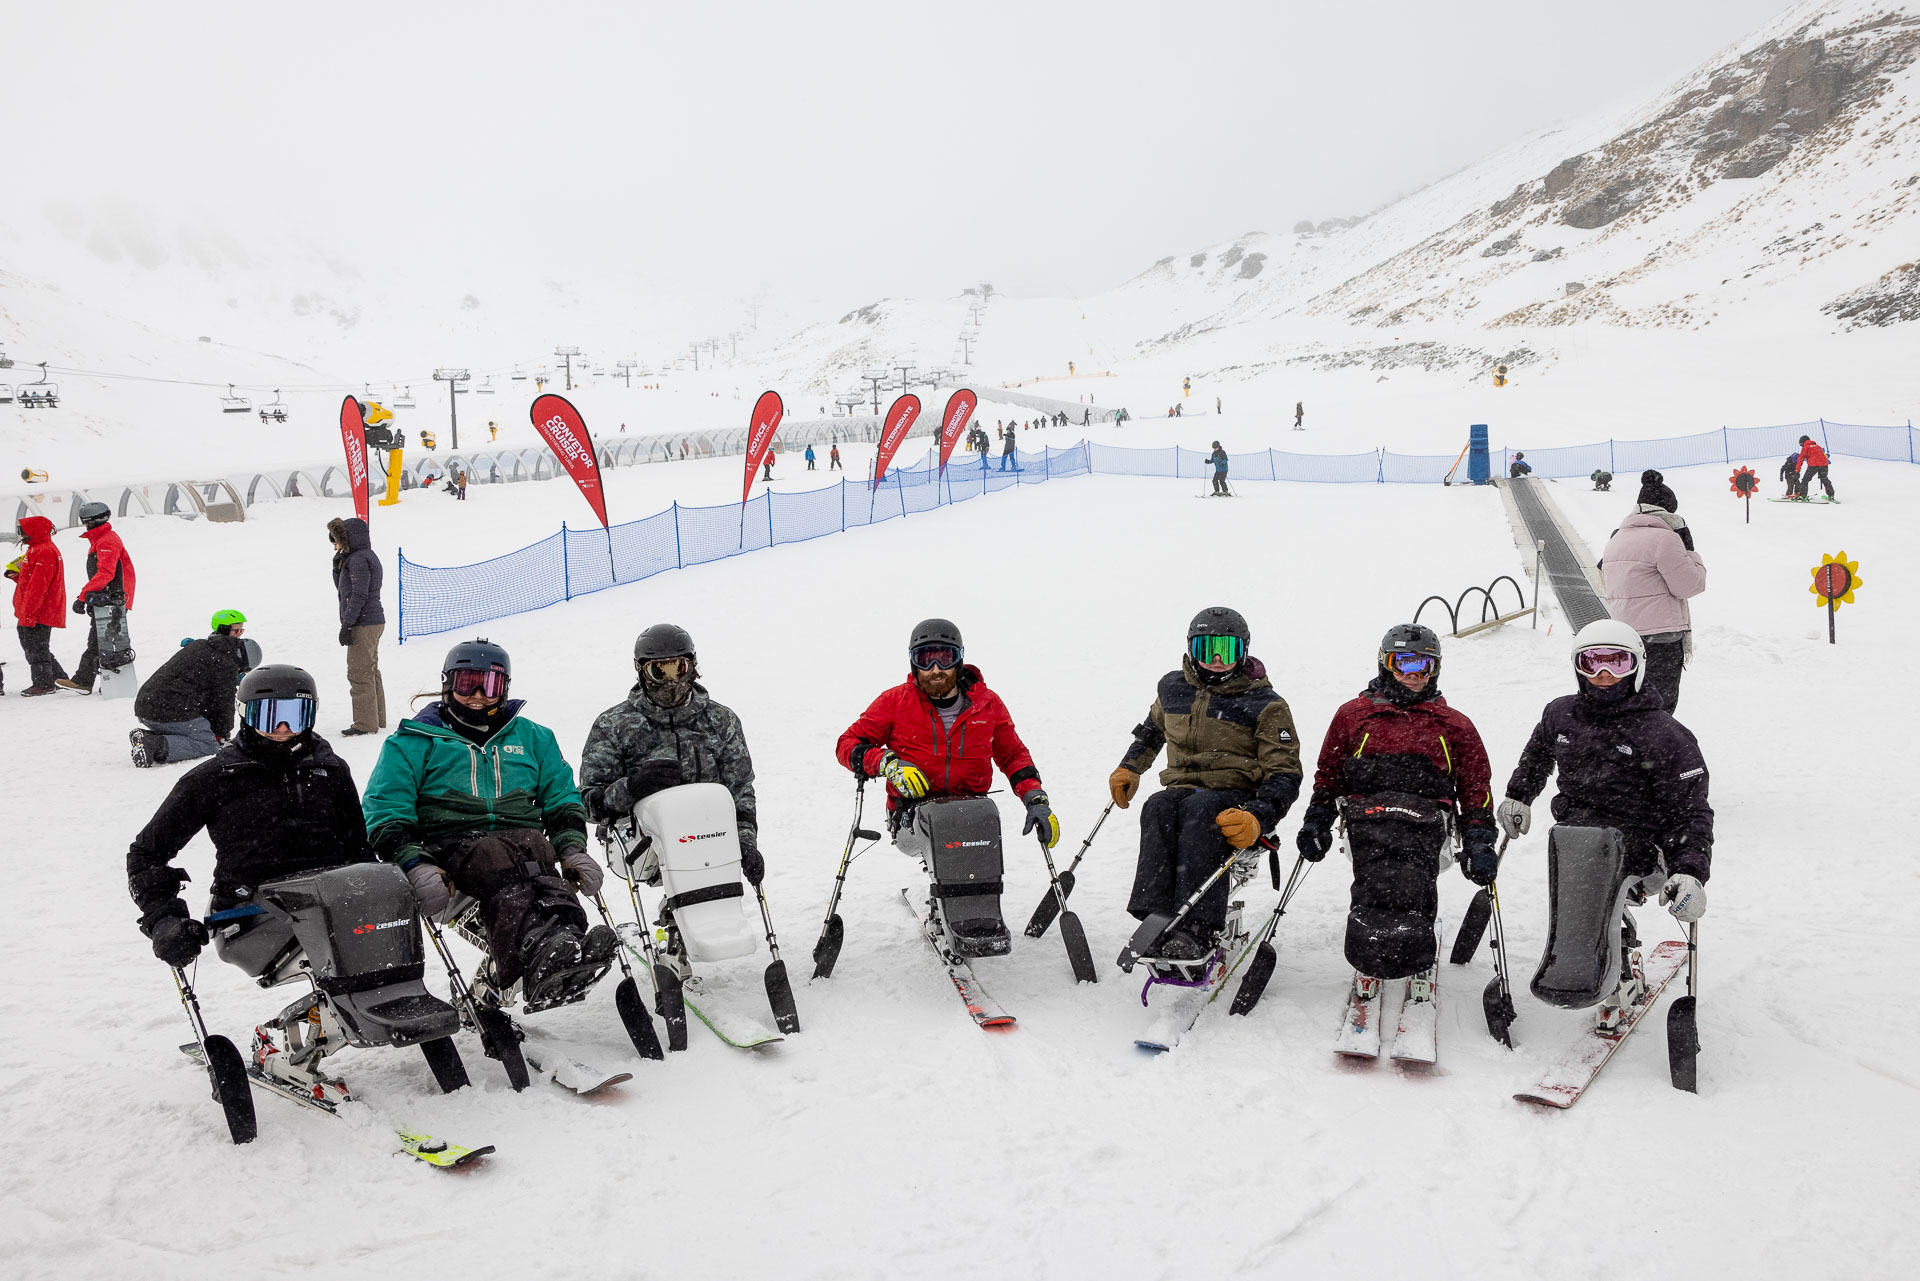 A group of people on sit skis at the Festival